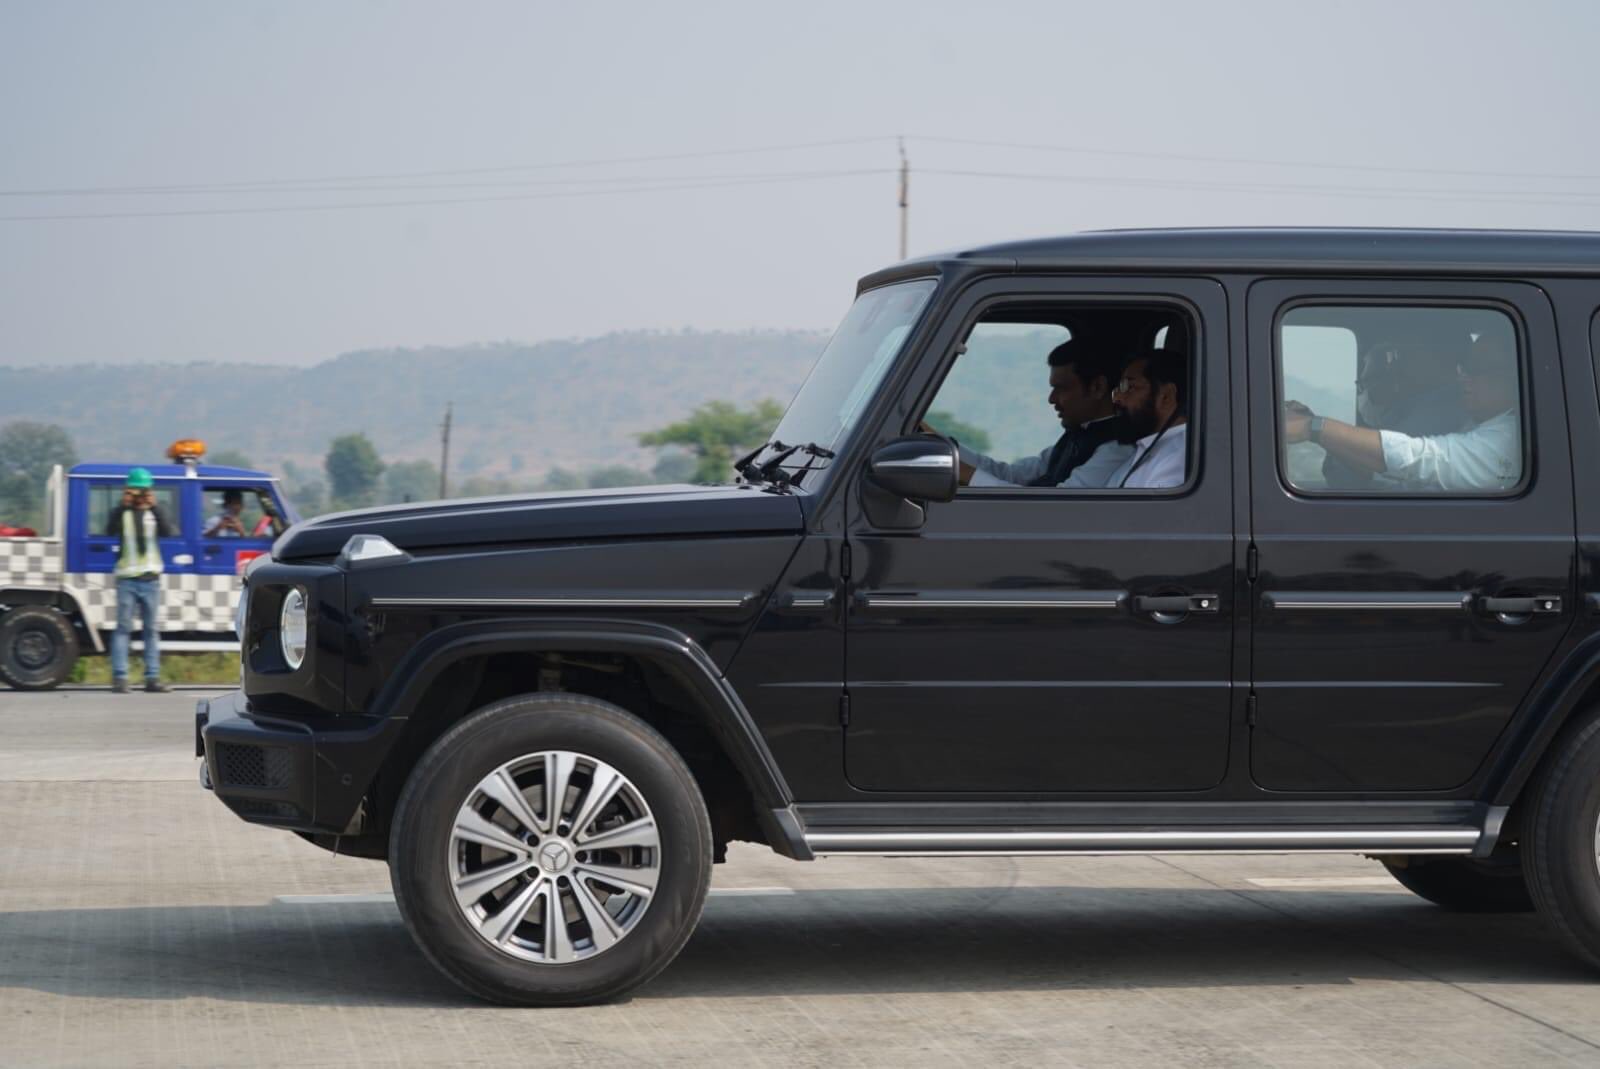 fadnavis eknath shinde samrudhi mahamarg Mercedes Benz G350d Car Driven By Deputy Chief Minister Devendra Fadnavis Know Features And Price in Marathi